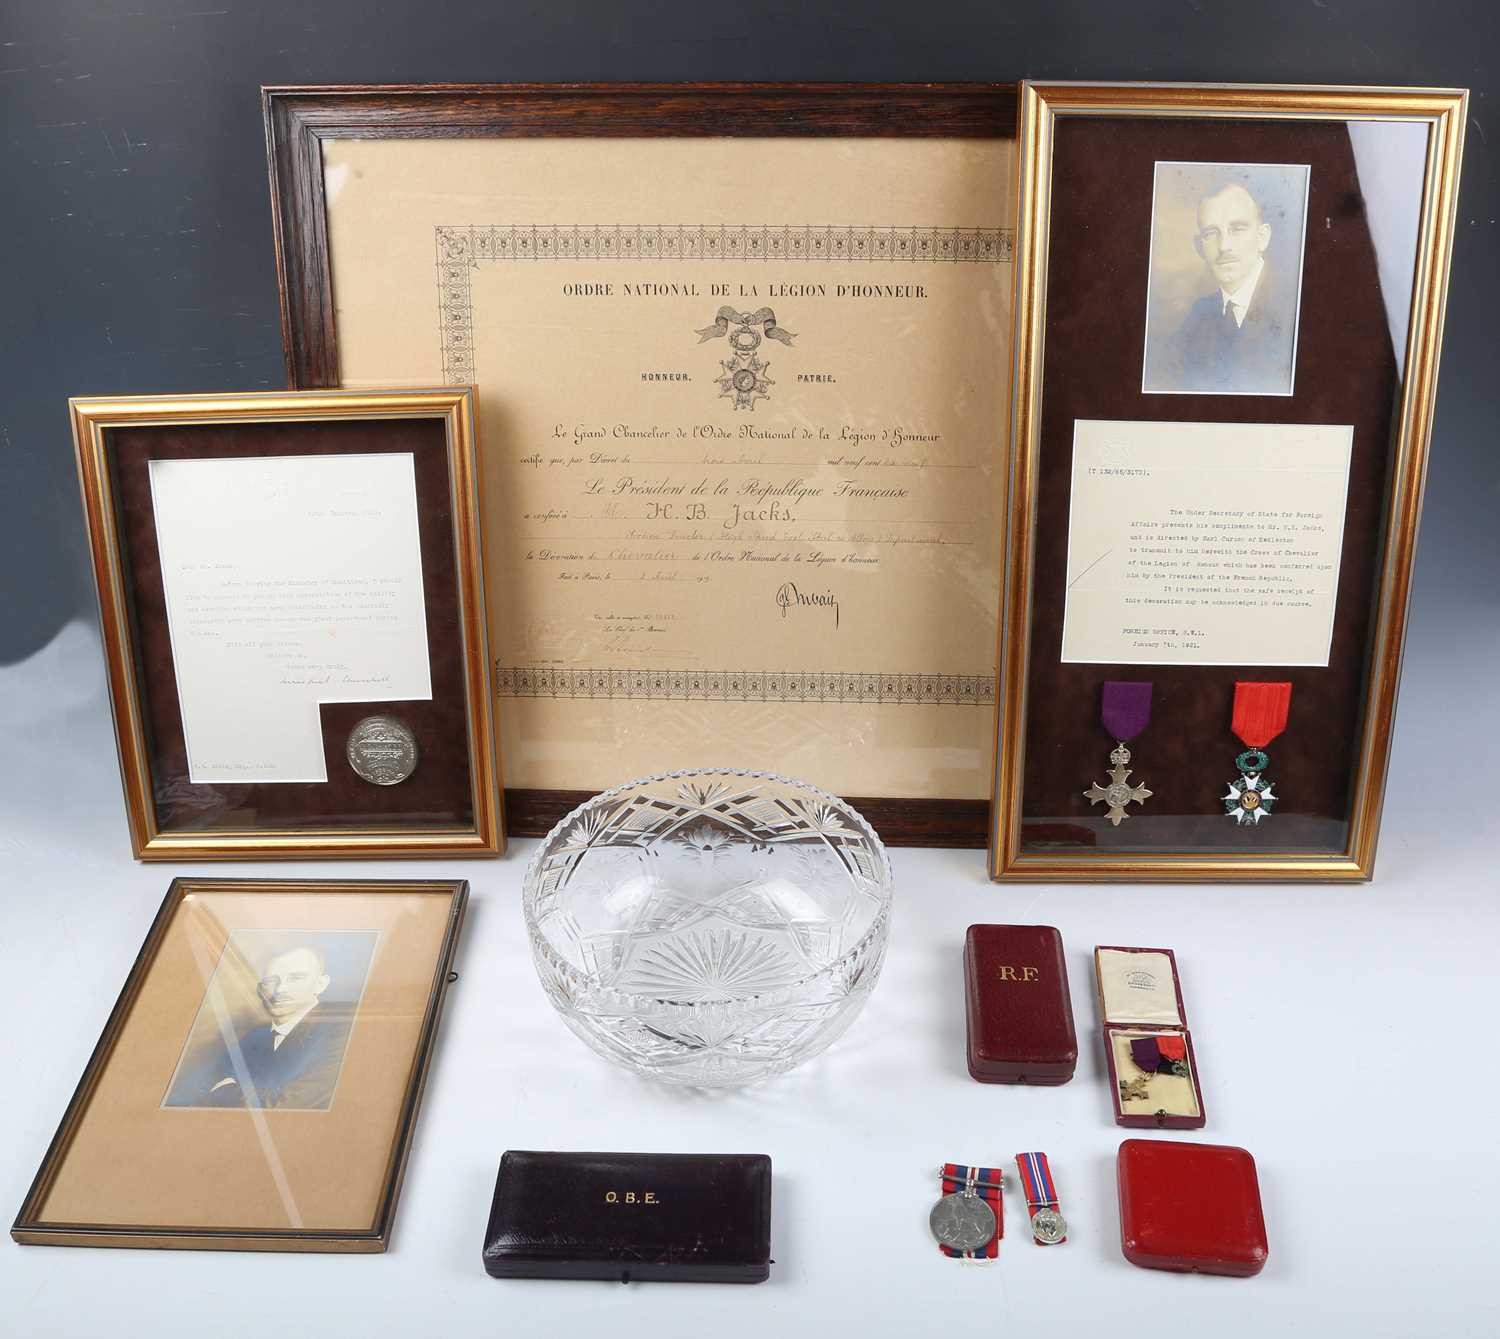 A group of post-First World War period medals and ephemera relating to H.B. Jacks and his work in